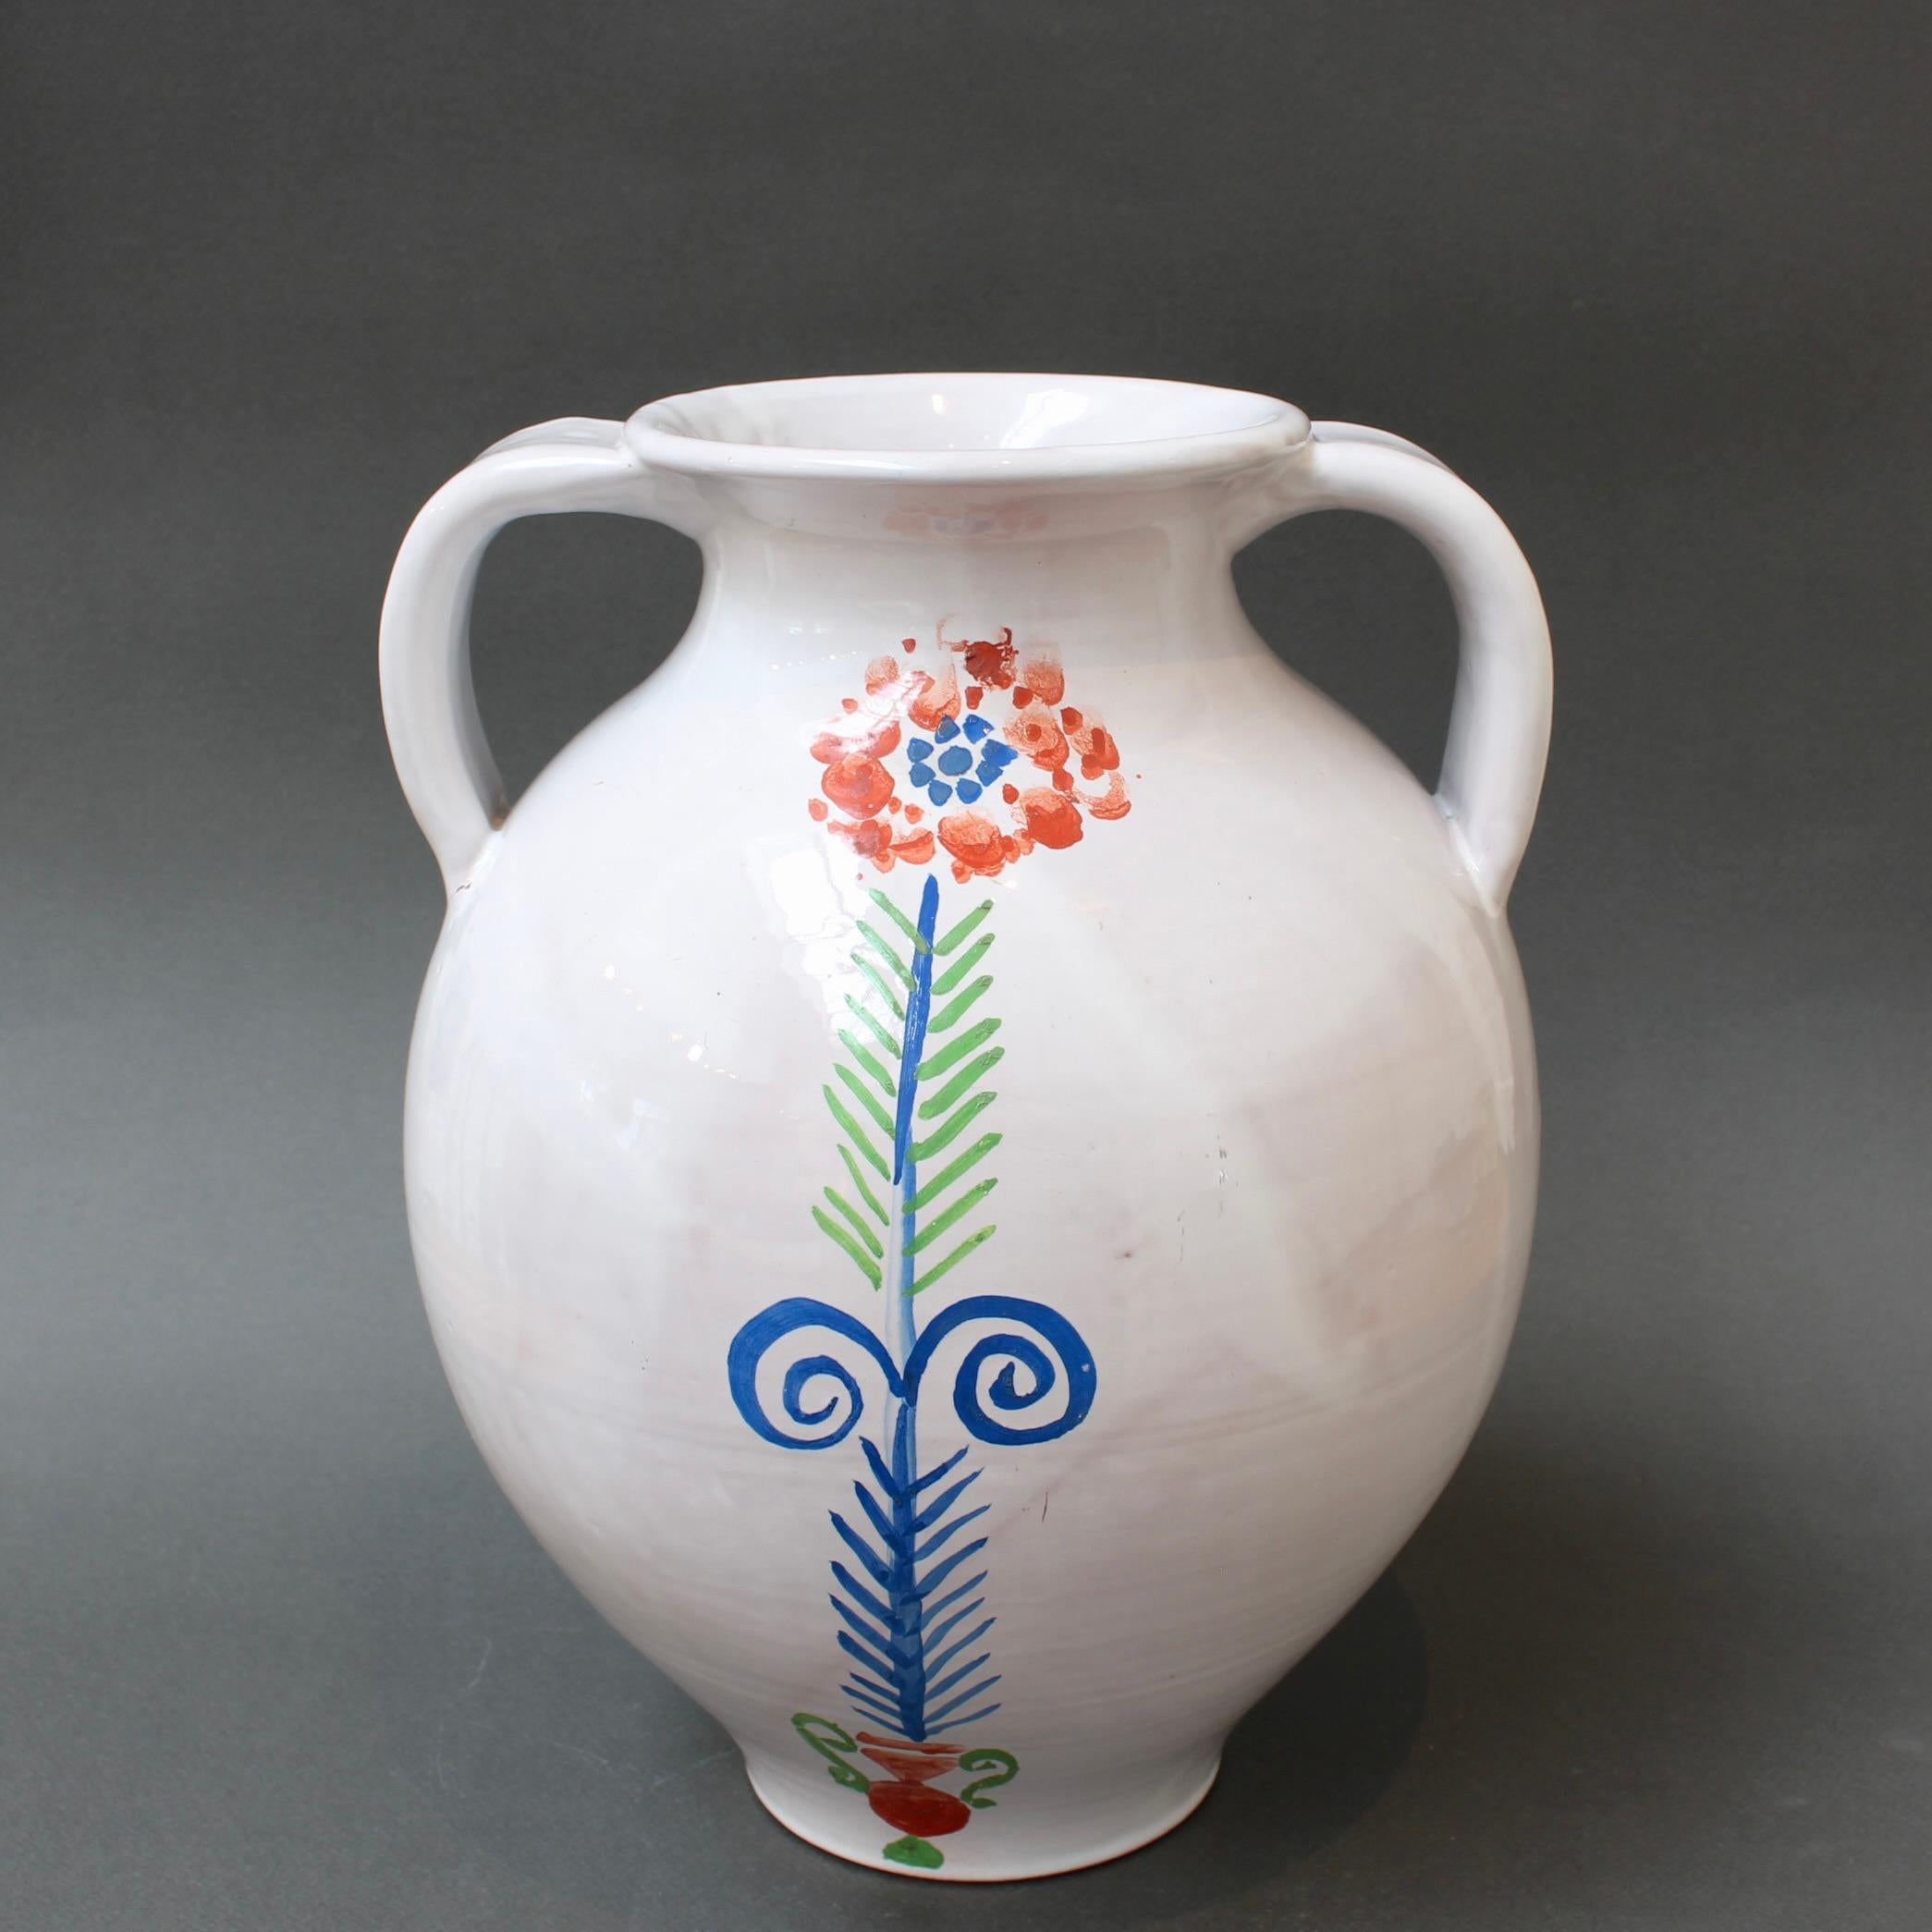 Vintage French Hand-Painted Ceramic Vase by Roger Capron (circa 1960s) For Sale 1